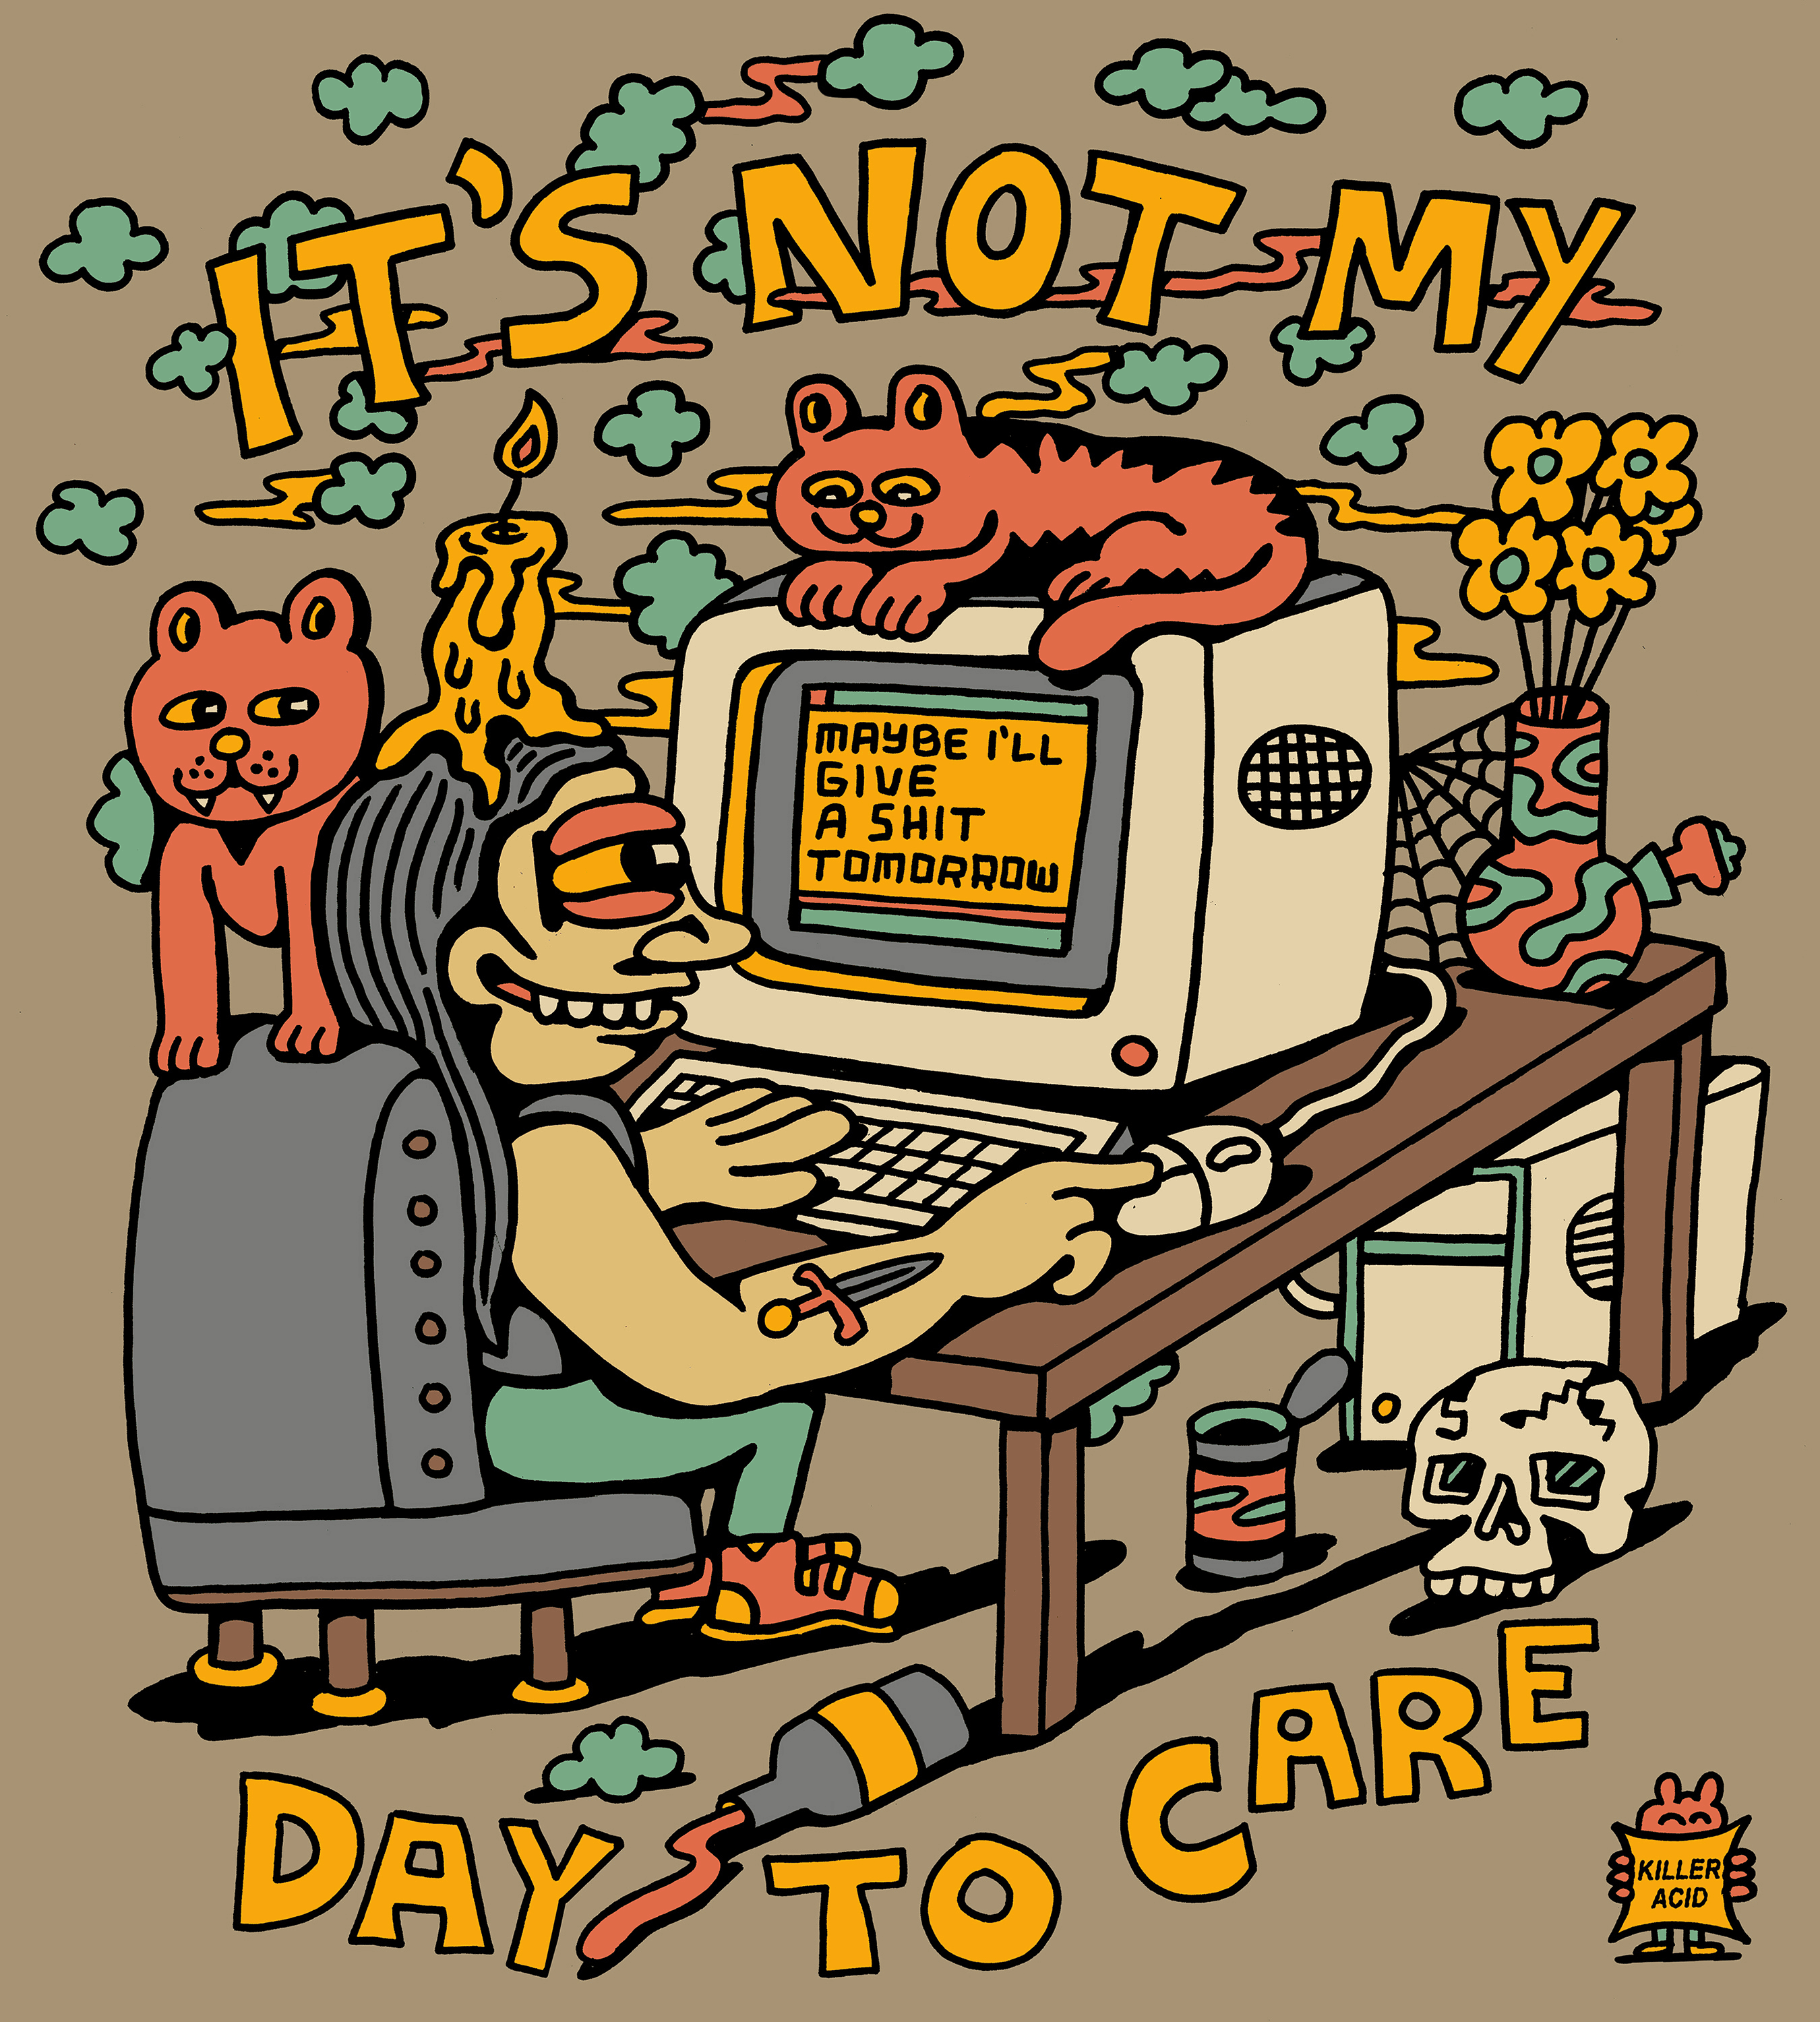 It's Not My Day To Care #5